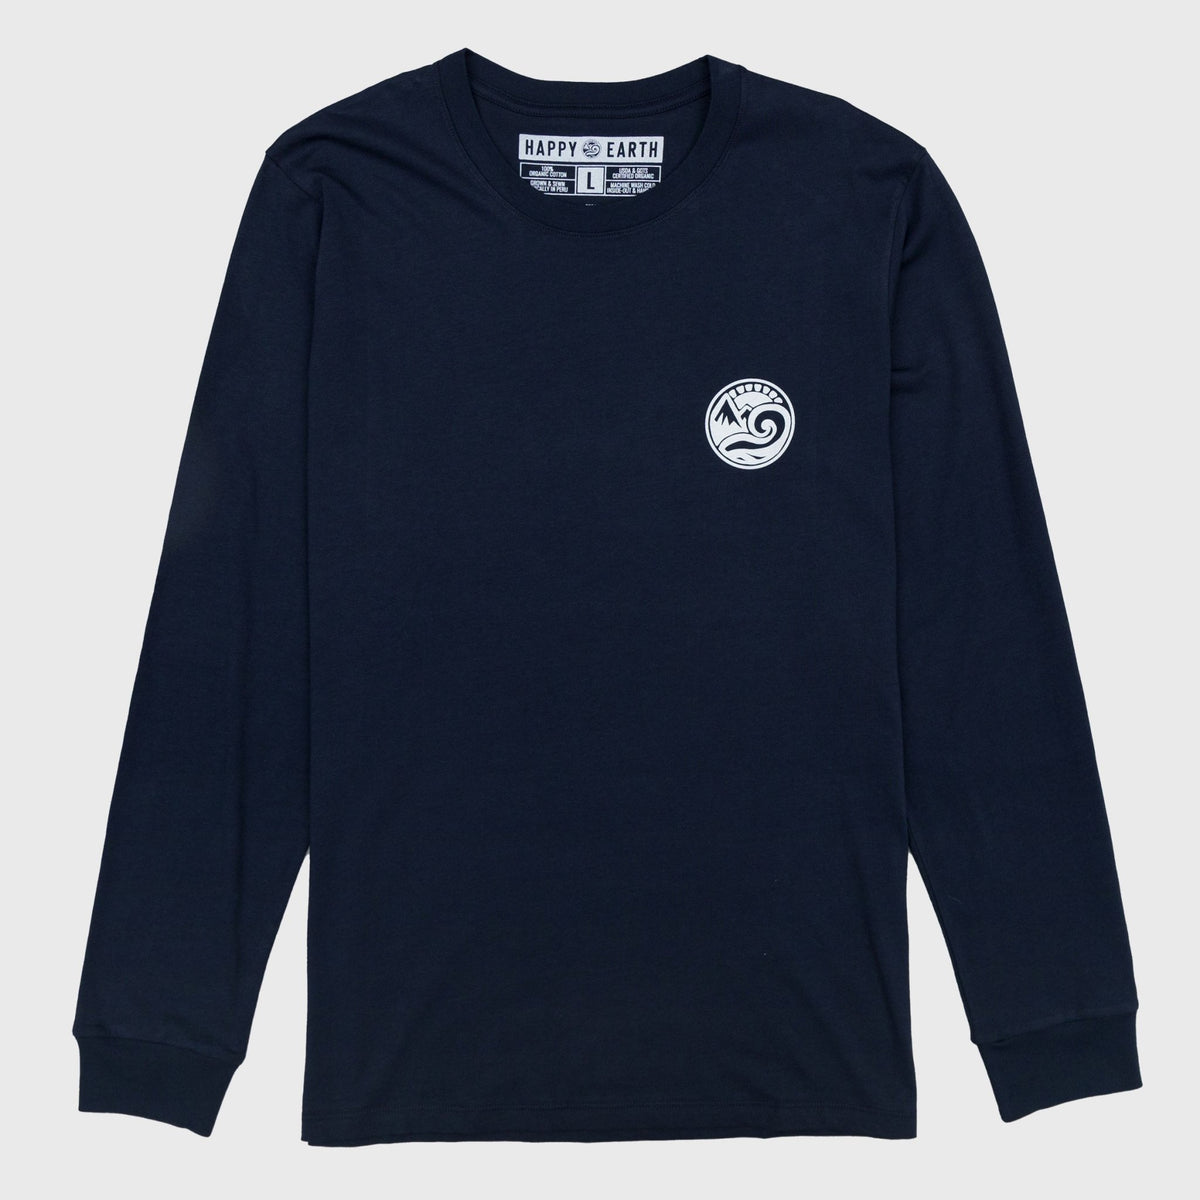 All-gender Ours Polaire Organic Cotton Long Sleeve Tee - Navy Blue